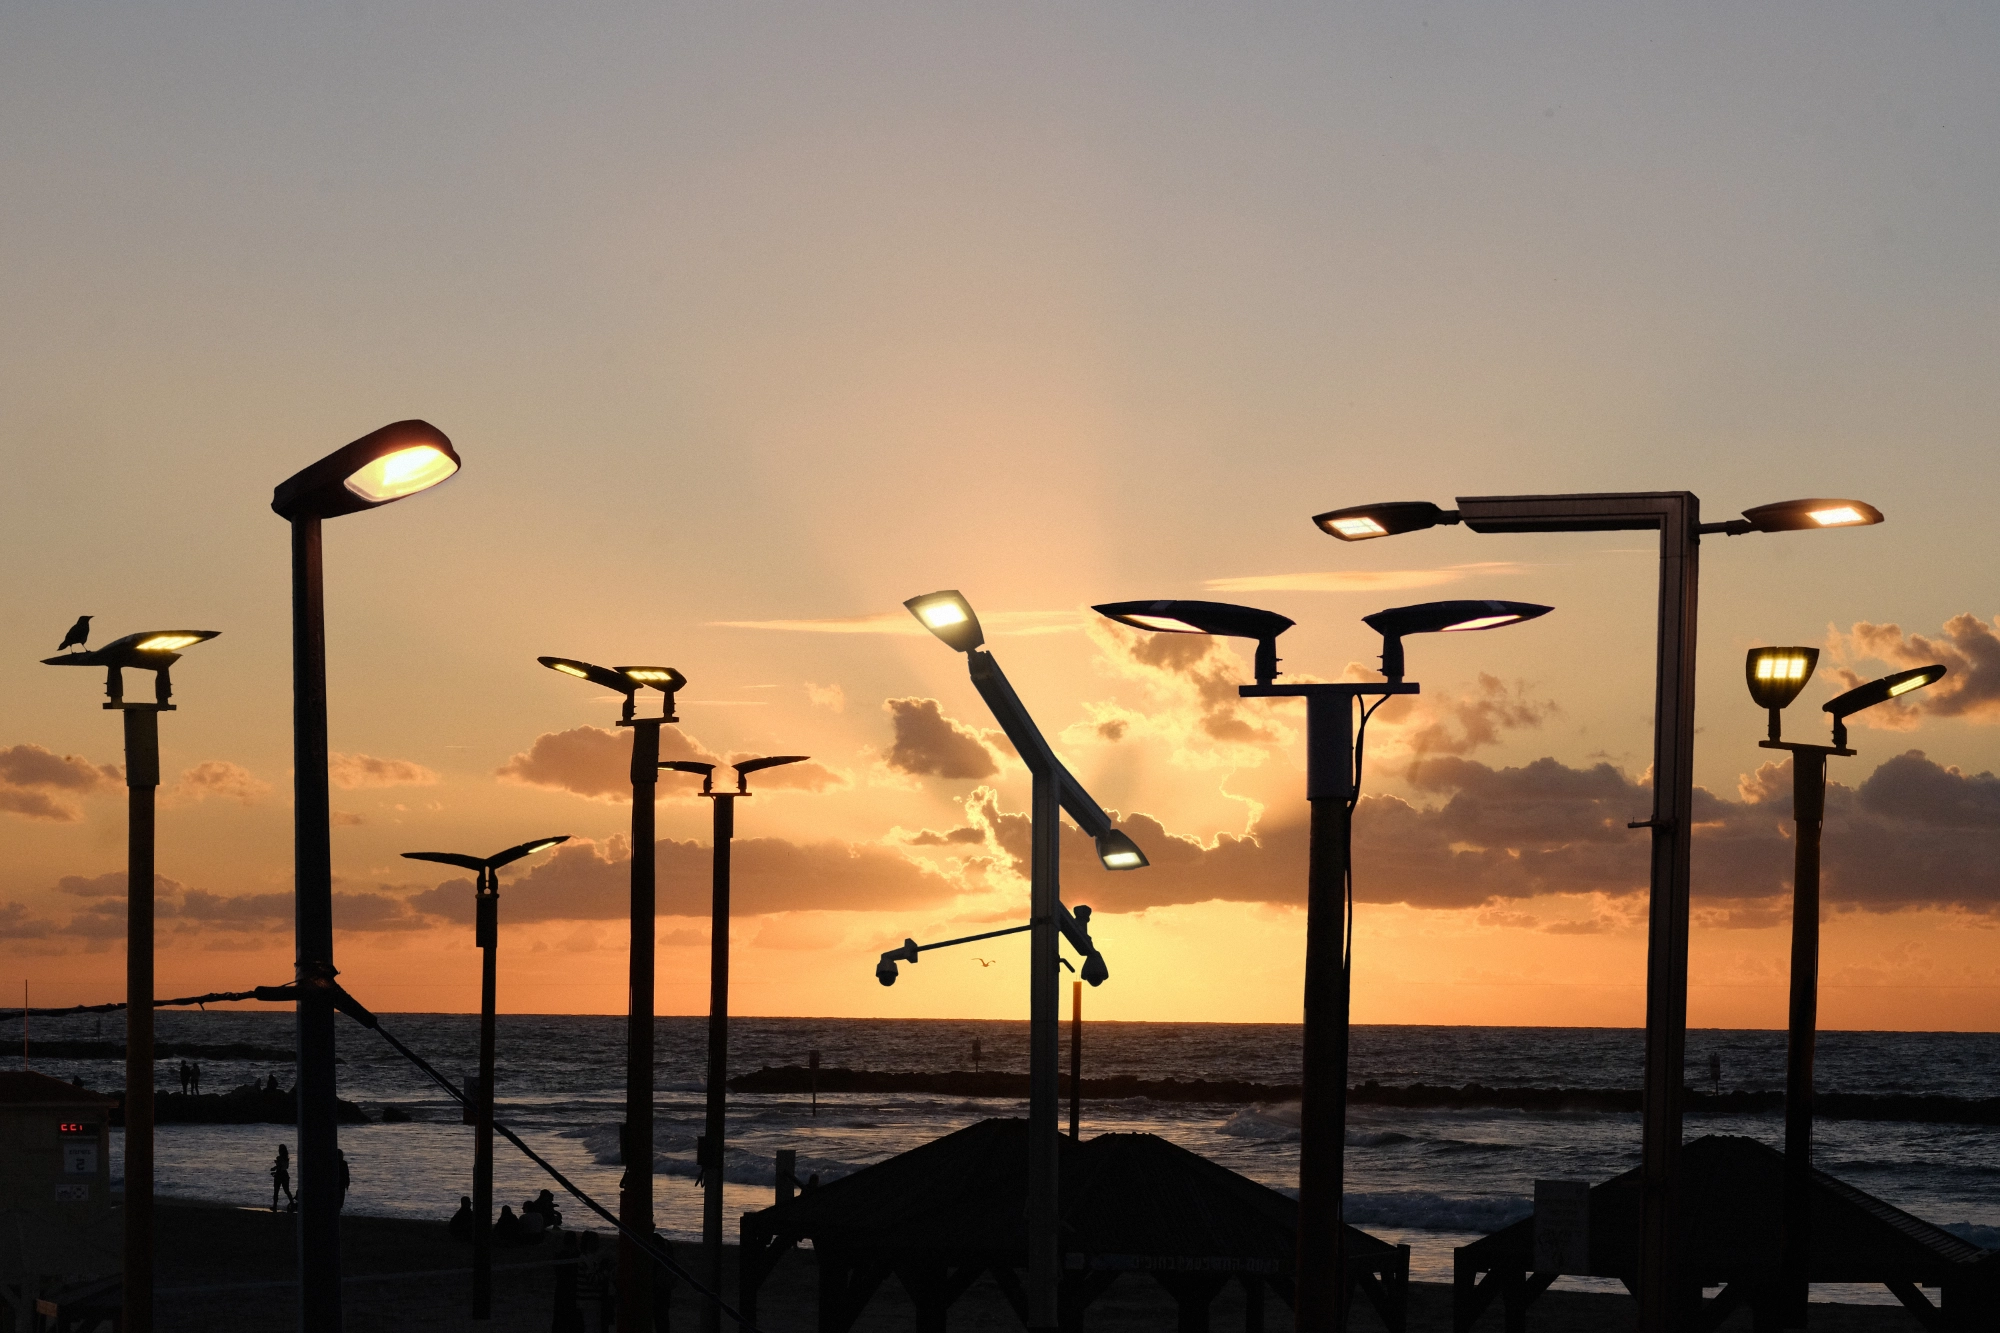 A collage of light poles at sunset near the beach